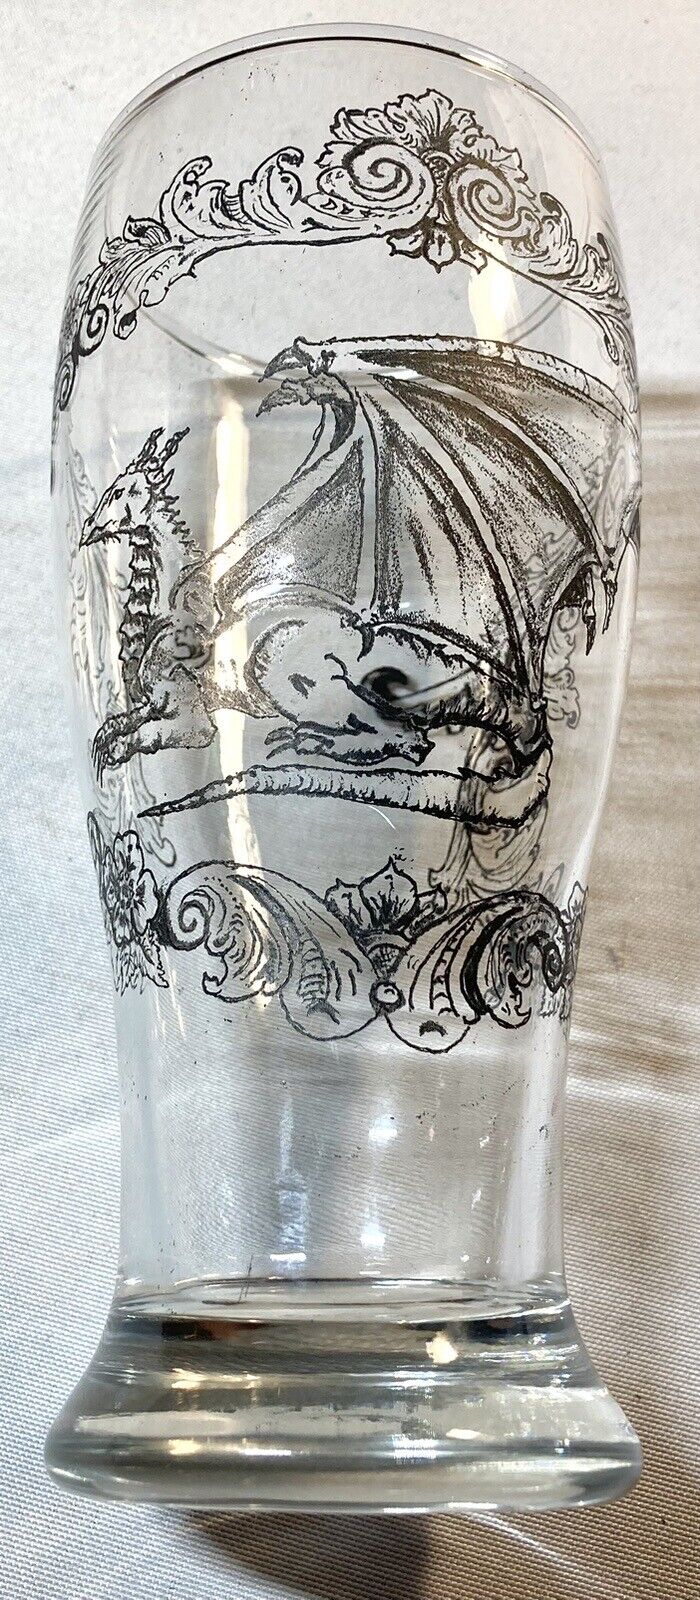 Hand-etched Nordic Pagan Medieval Dragon Glass, Black Indian Ink Stained